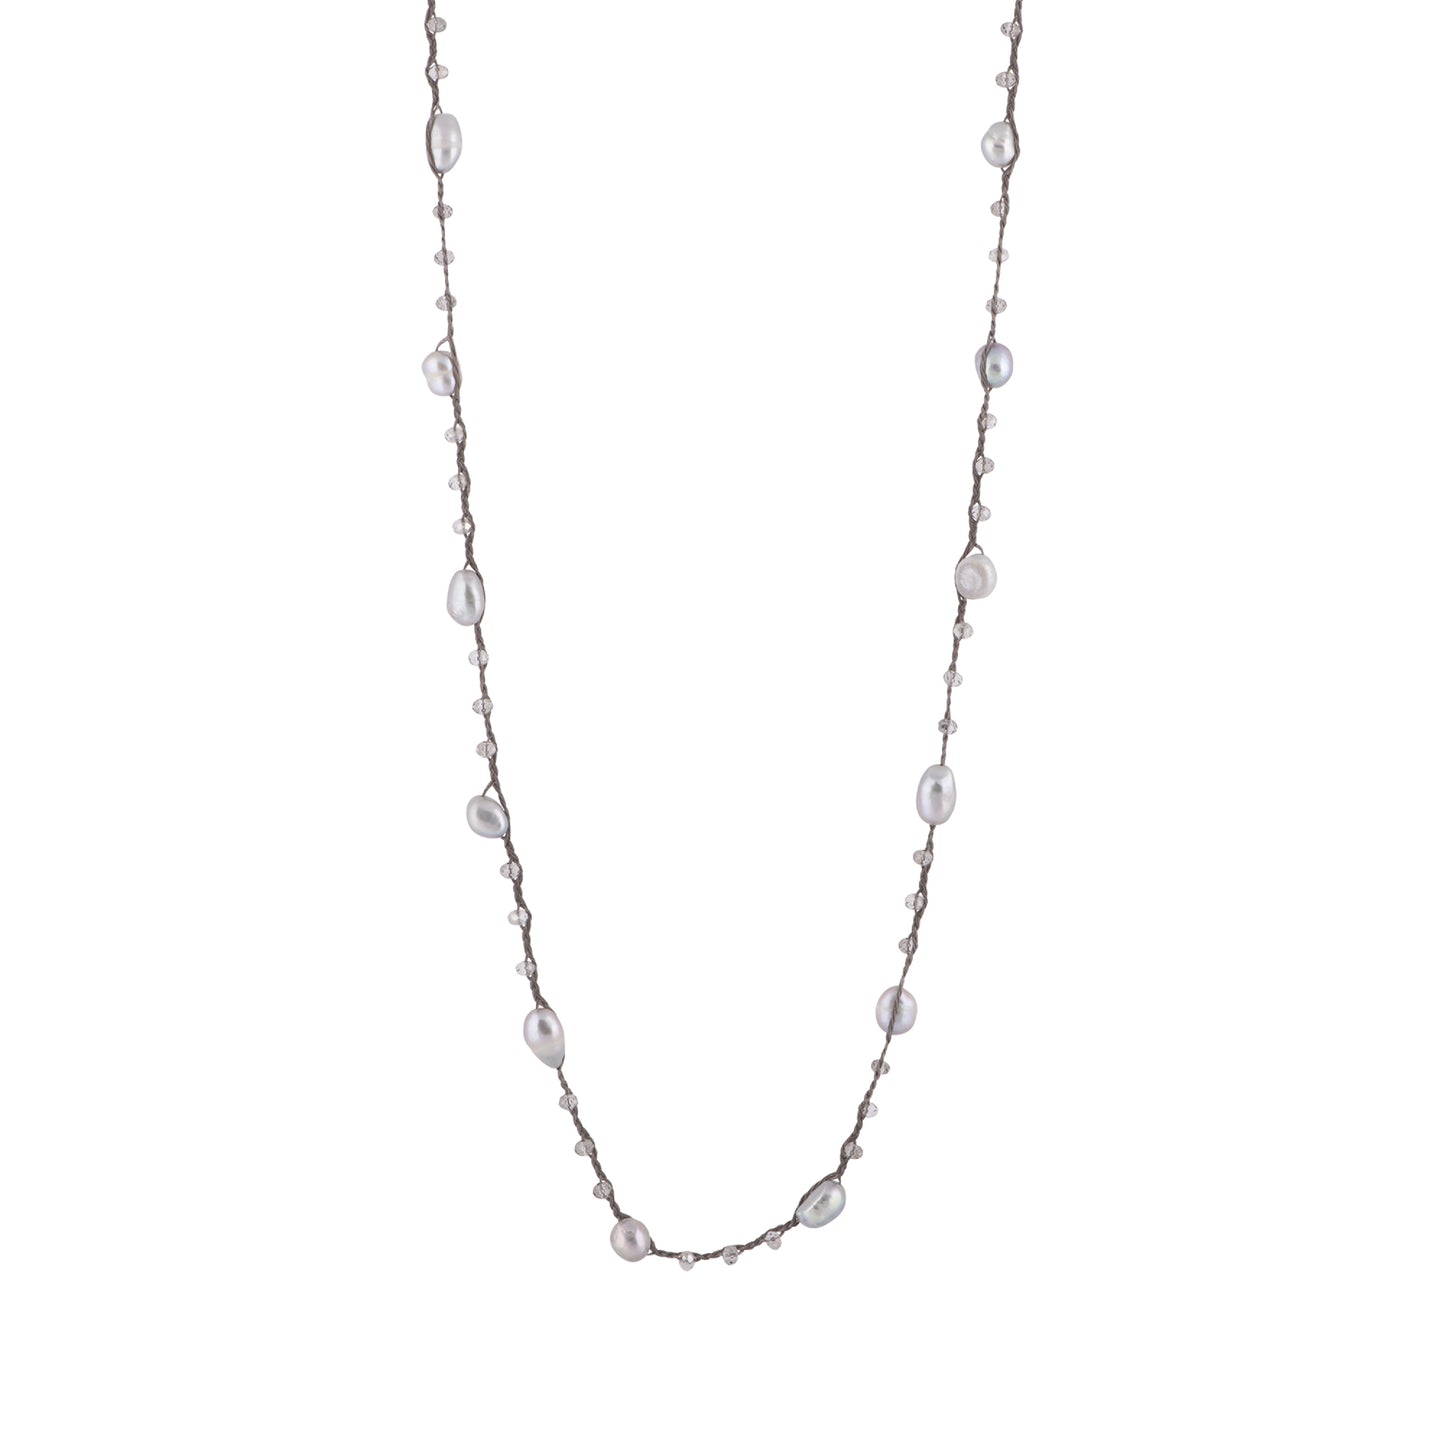 Antonia - Crochet crystal necklace with freshwater pearls (Silver pearls)